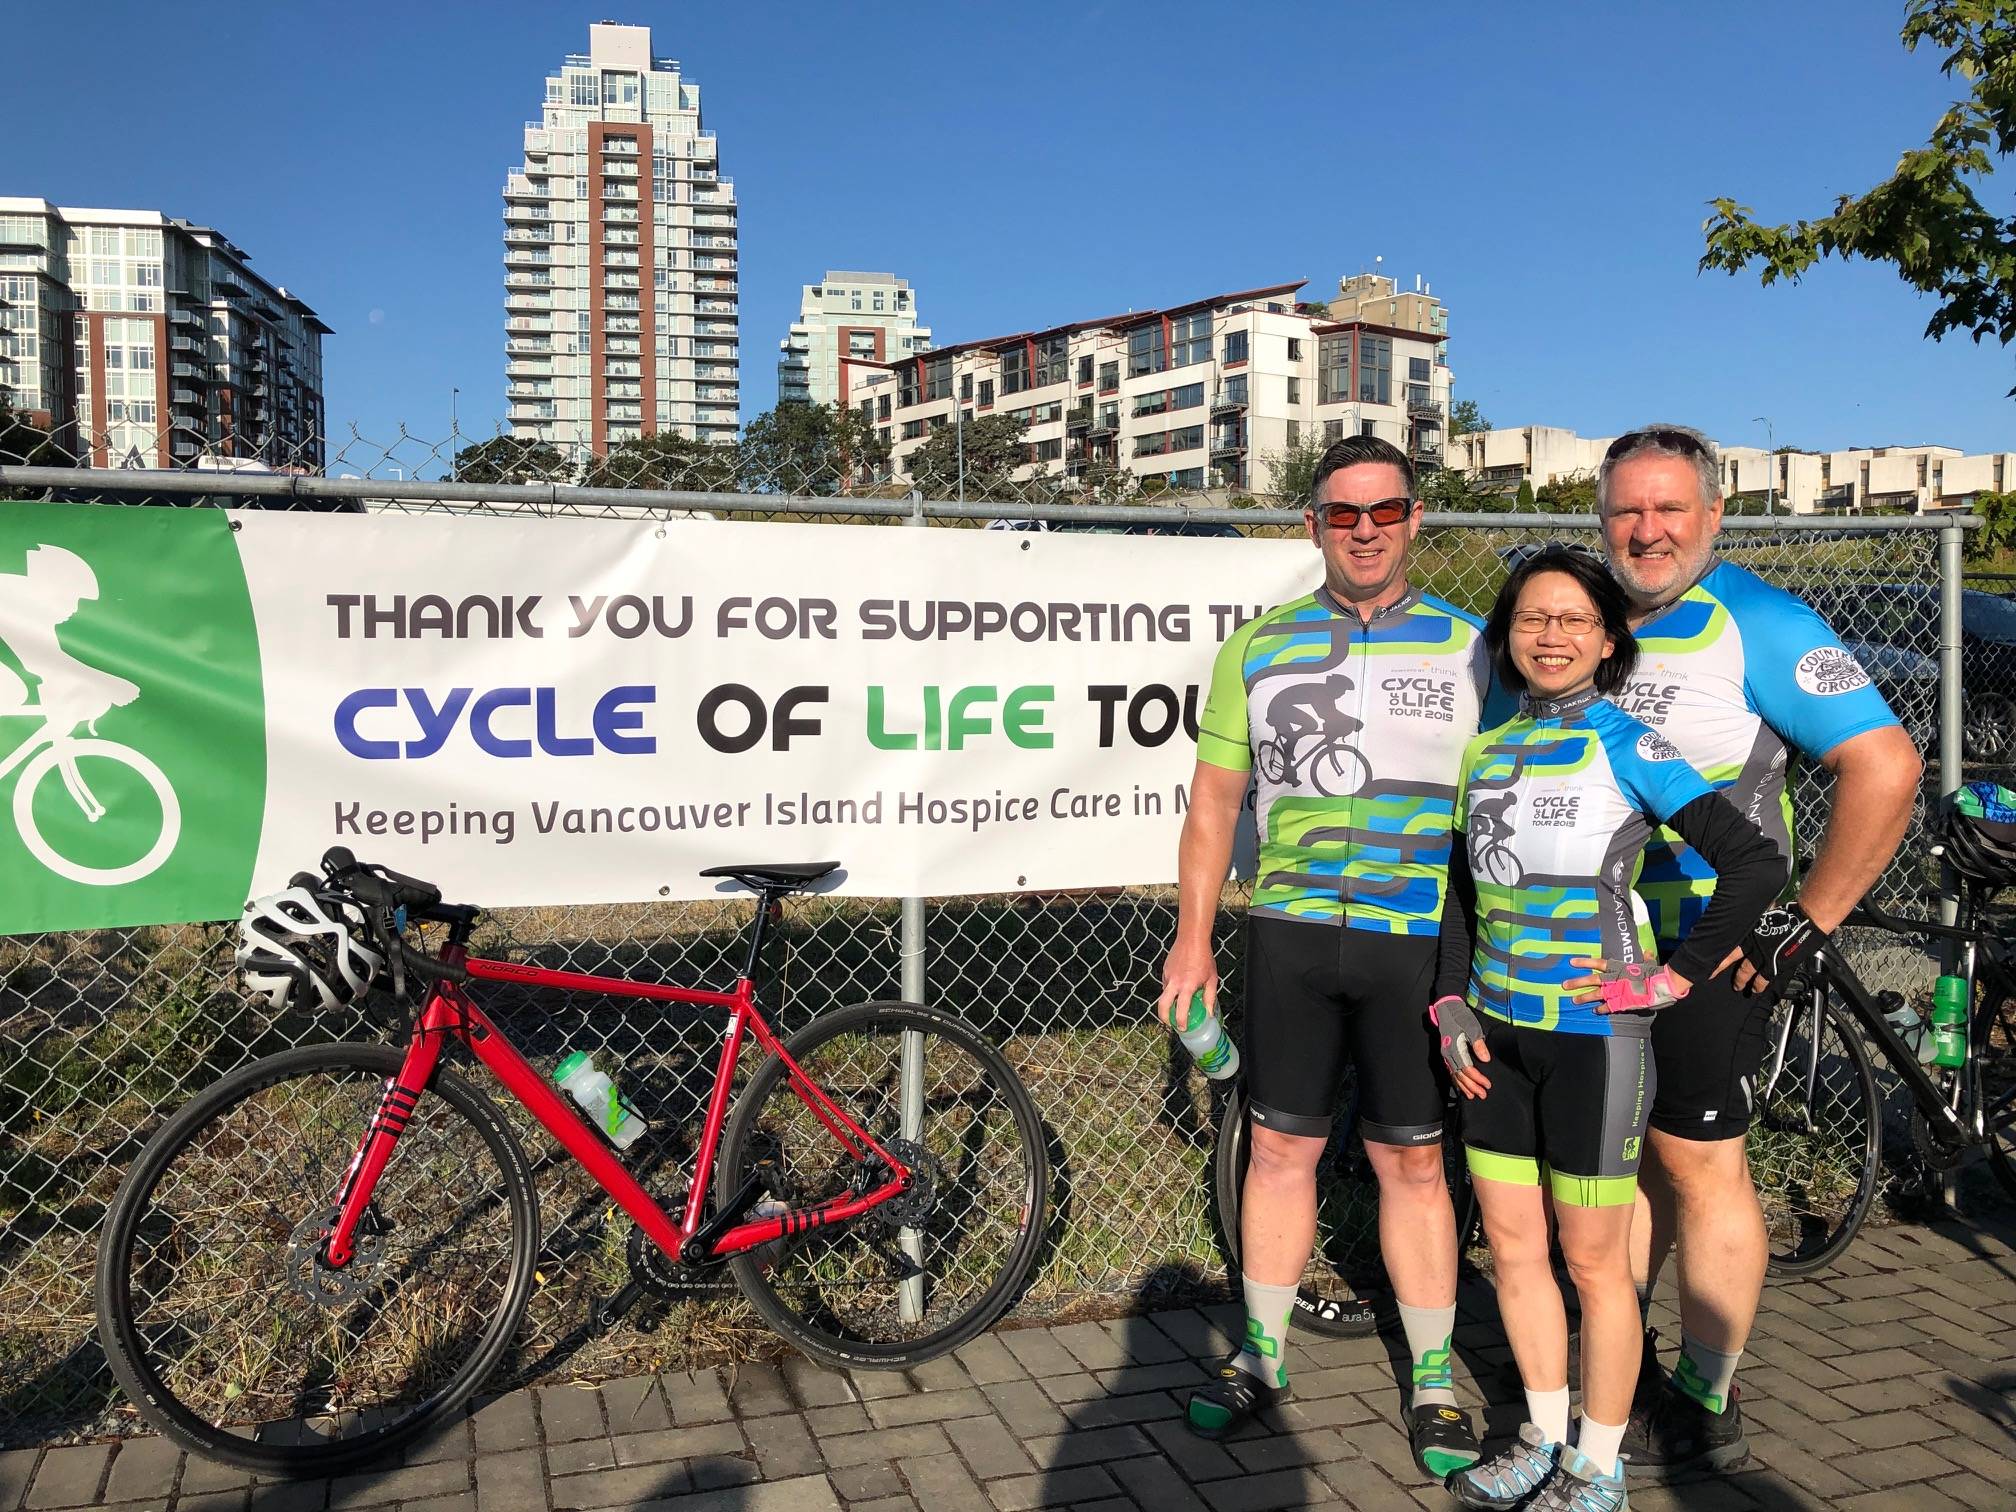 25252480_web1_210521-GNG-CycleLifeHospiceFundraiser-CYCLE_3